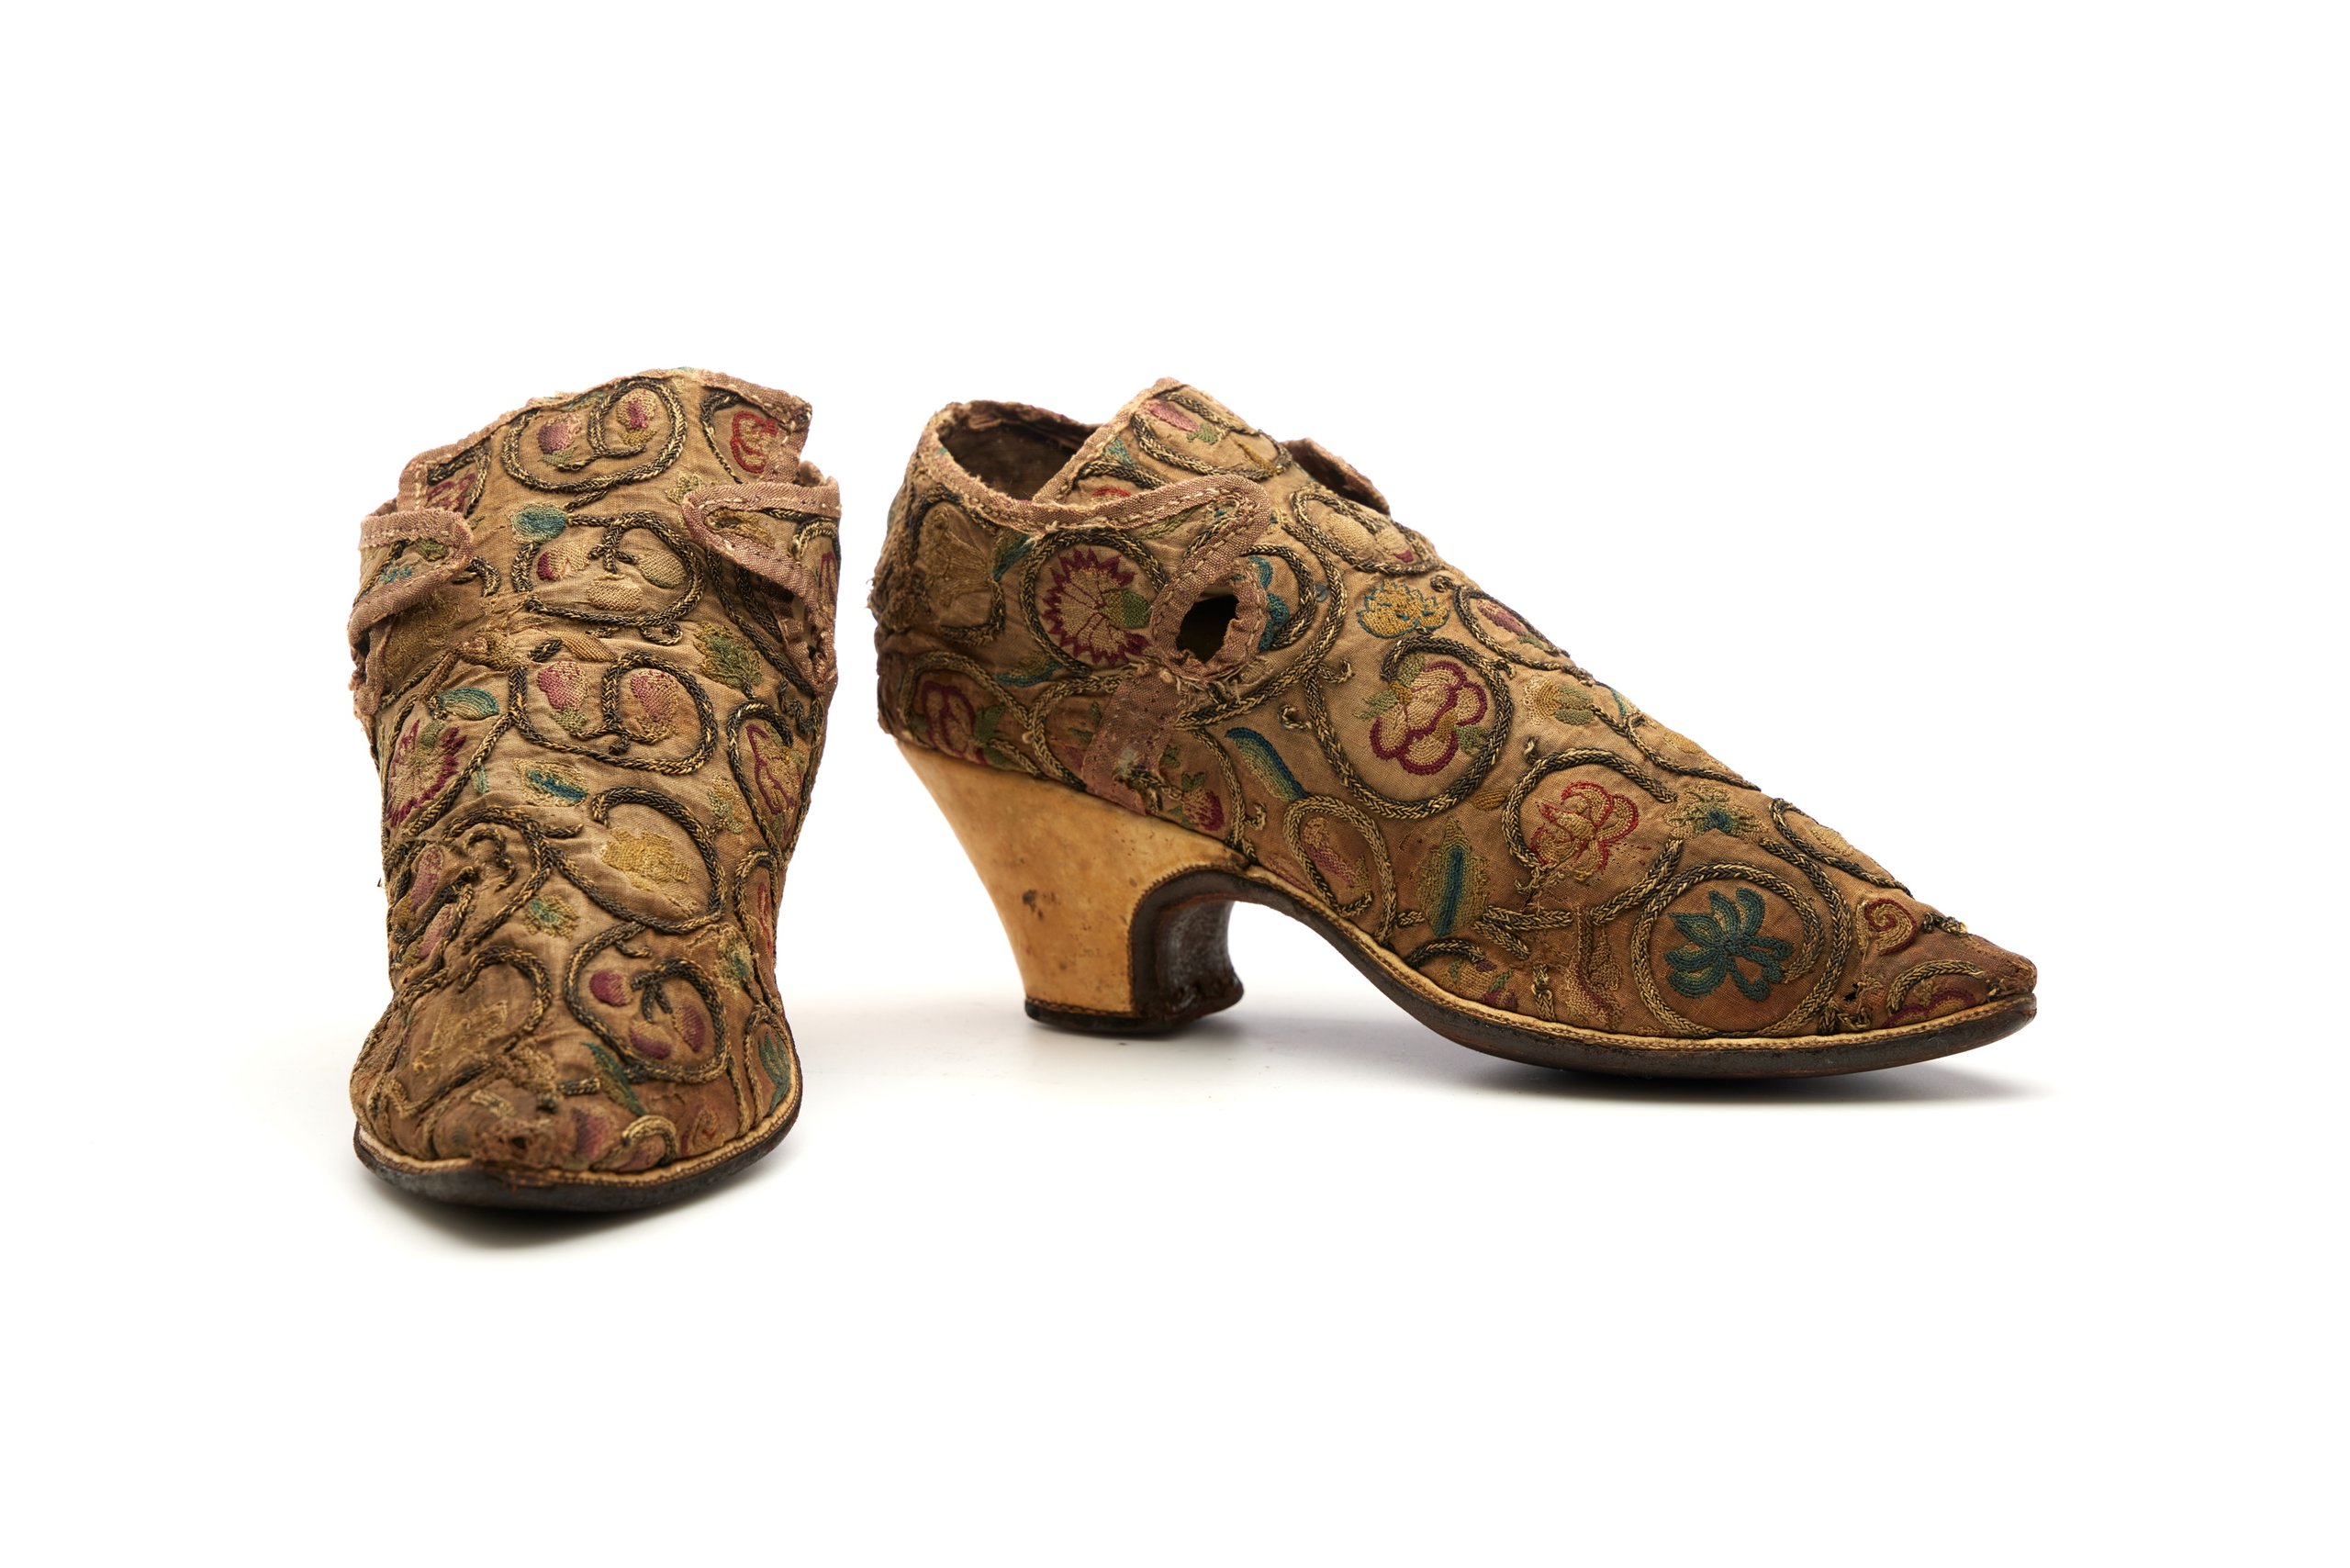 Pair of laced shoes from the Joseph Box collection